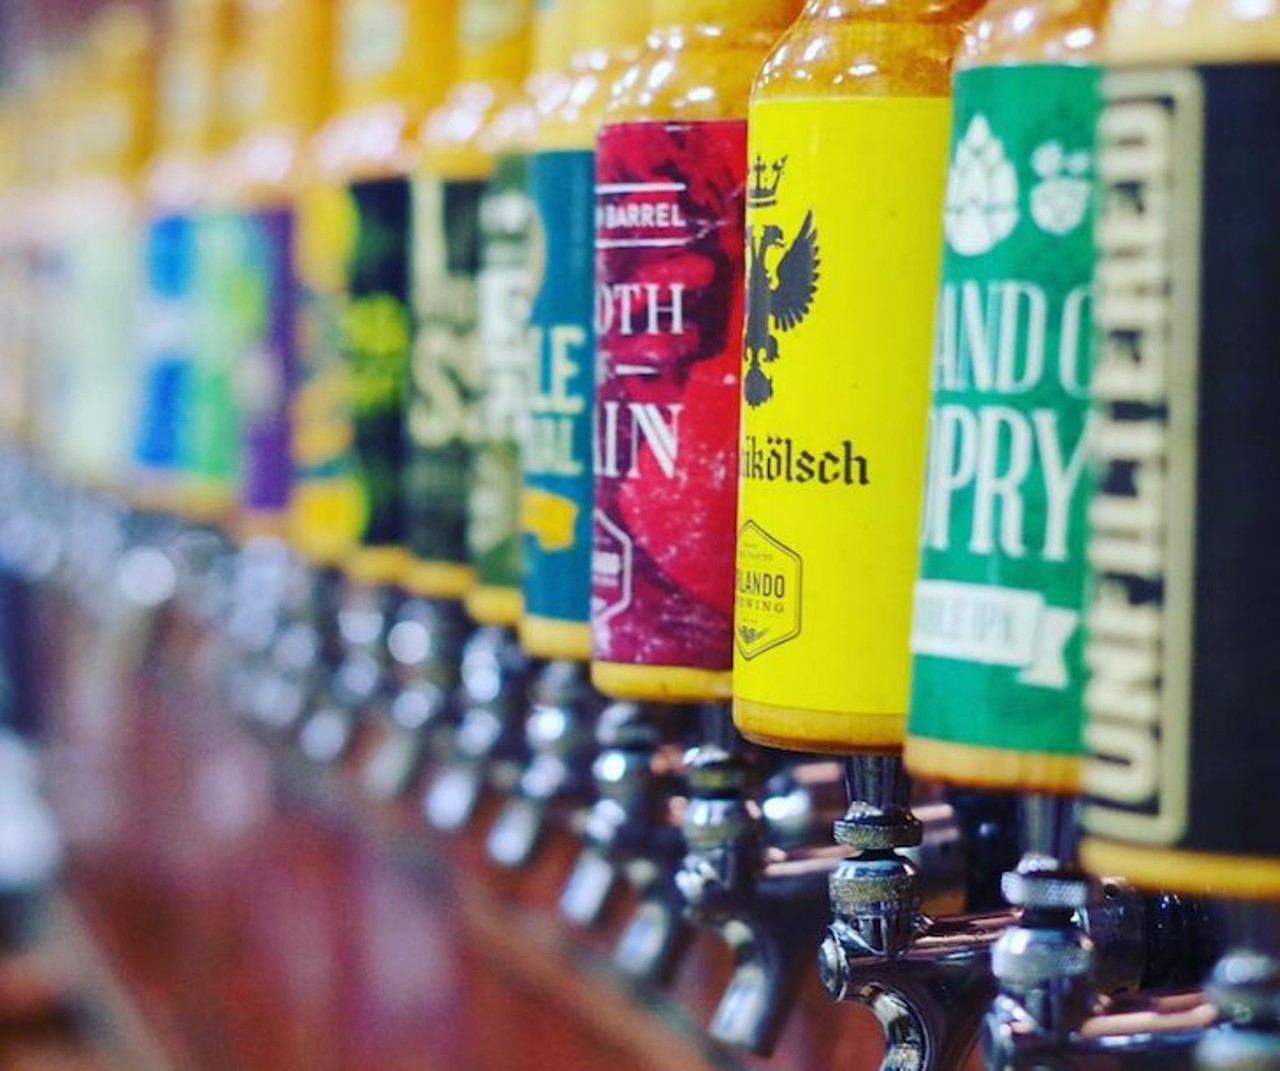 Head to Orlando Brewing for a tour of the brewery
Orlando Brewing | 1301 Atlanta Ave. | 407-872-1117 
See where the magic happens with a free tour of the brewery, then swing by the taproom to try one of the 20-something drinks they&#146;re slingin&#146;.
Photo via orlando_brewing/Instagram